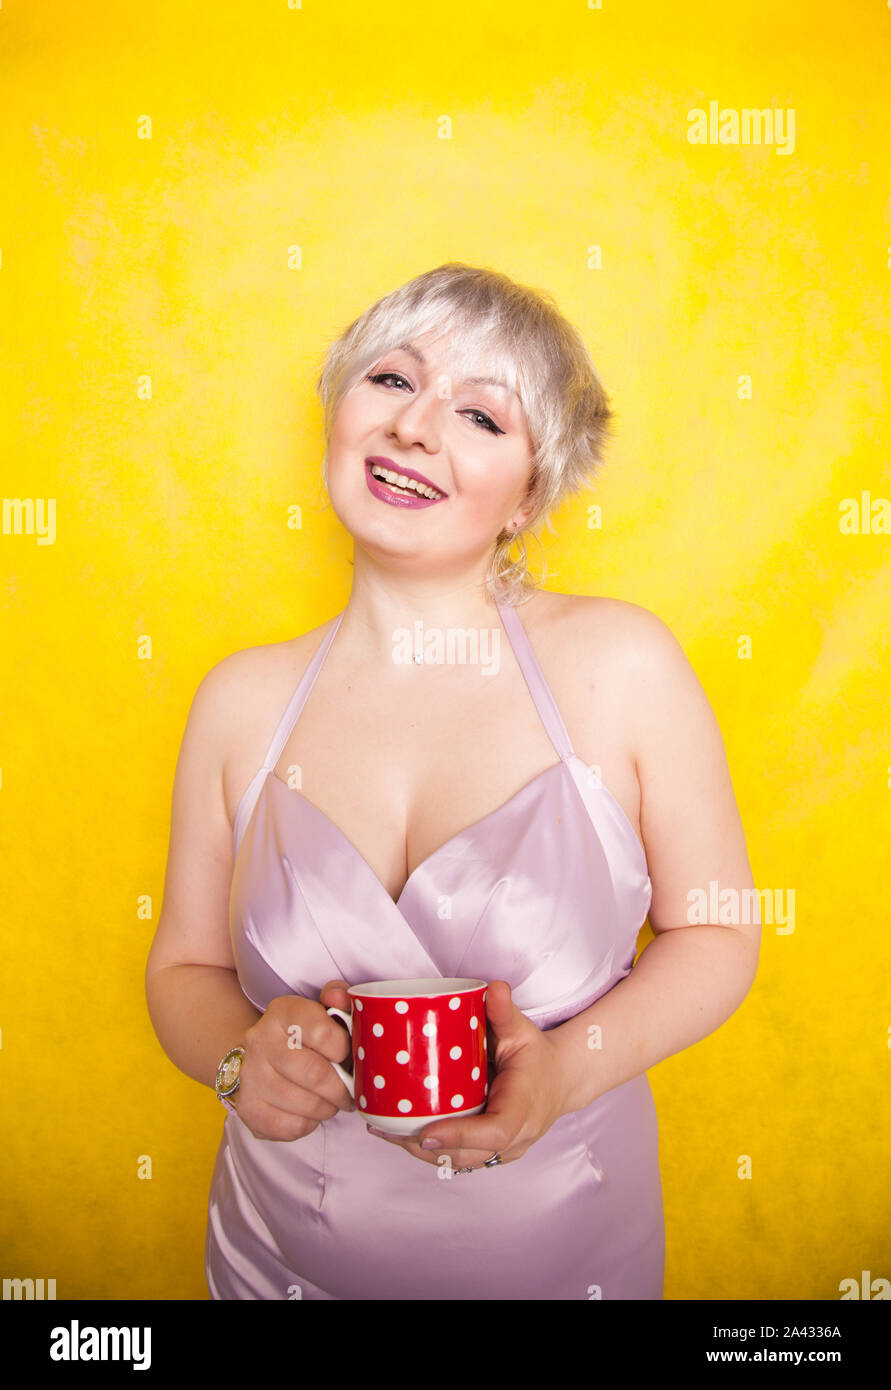 pretty curvy young blonde woman with short hair enjoys drinking tea from  cute red polka dot ceramic cup on yellow studio background Stock Photo -  Alamy